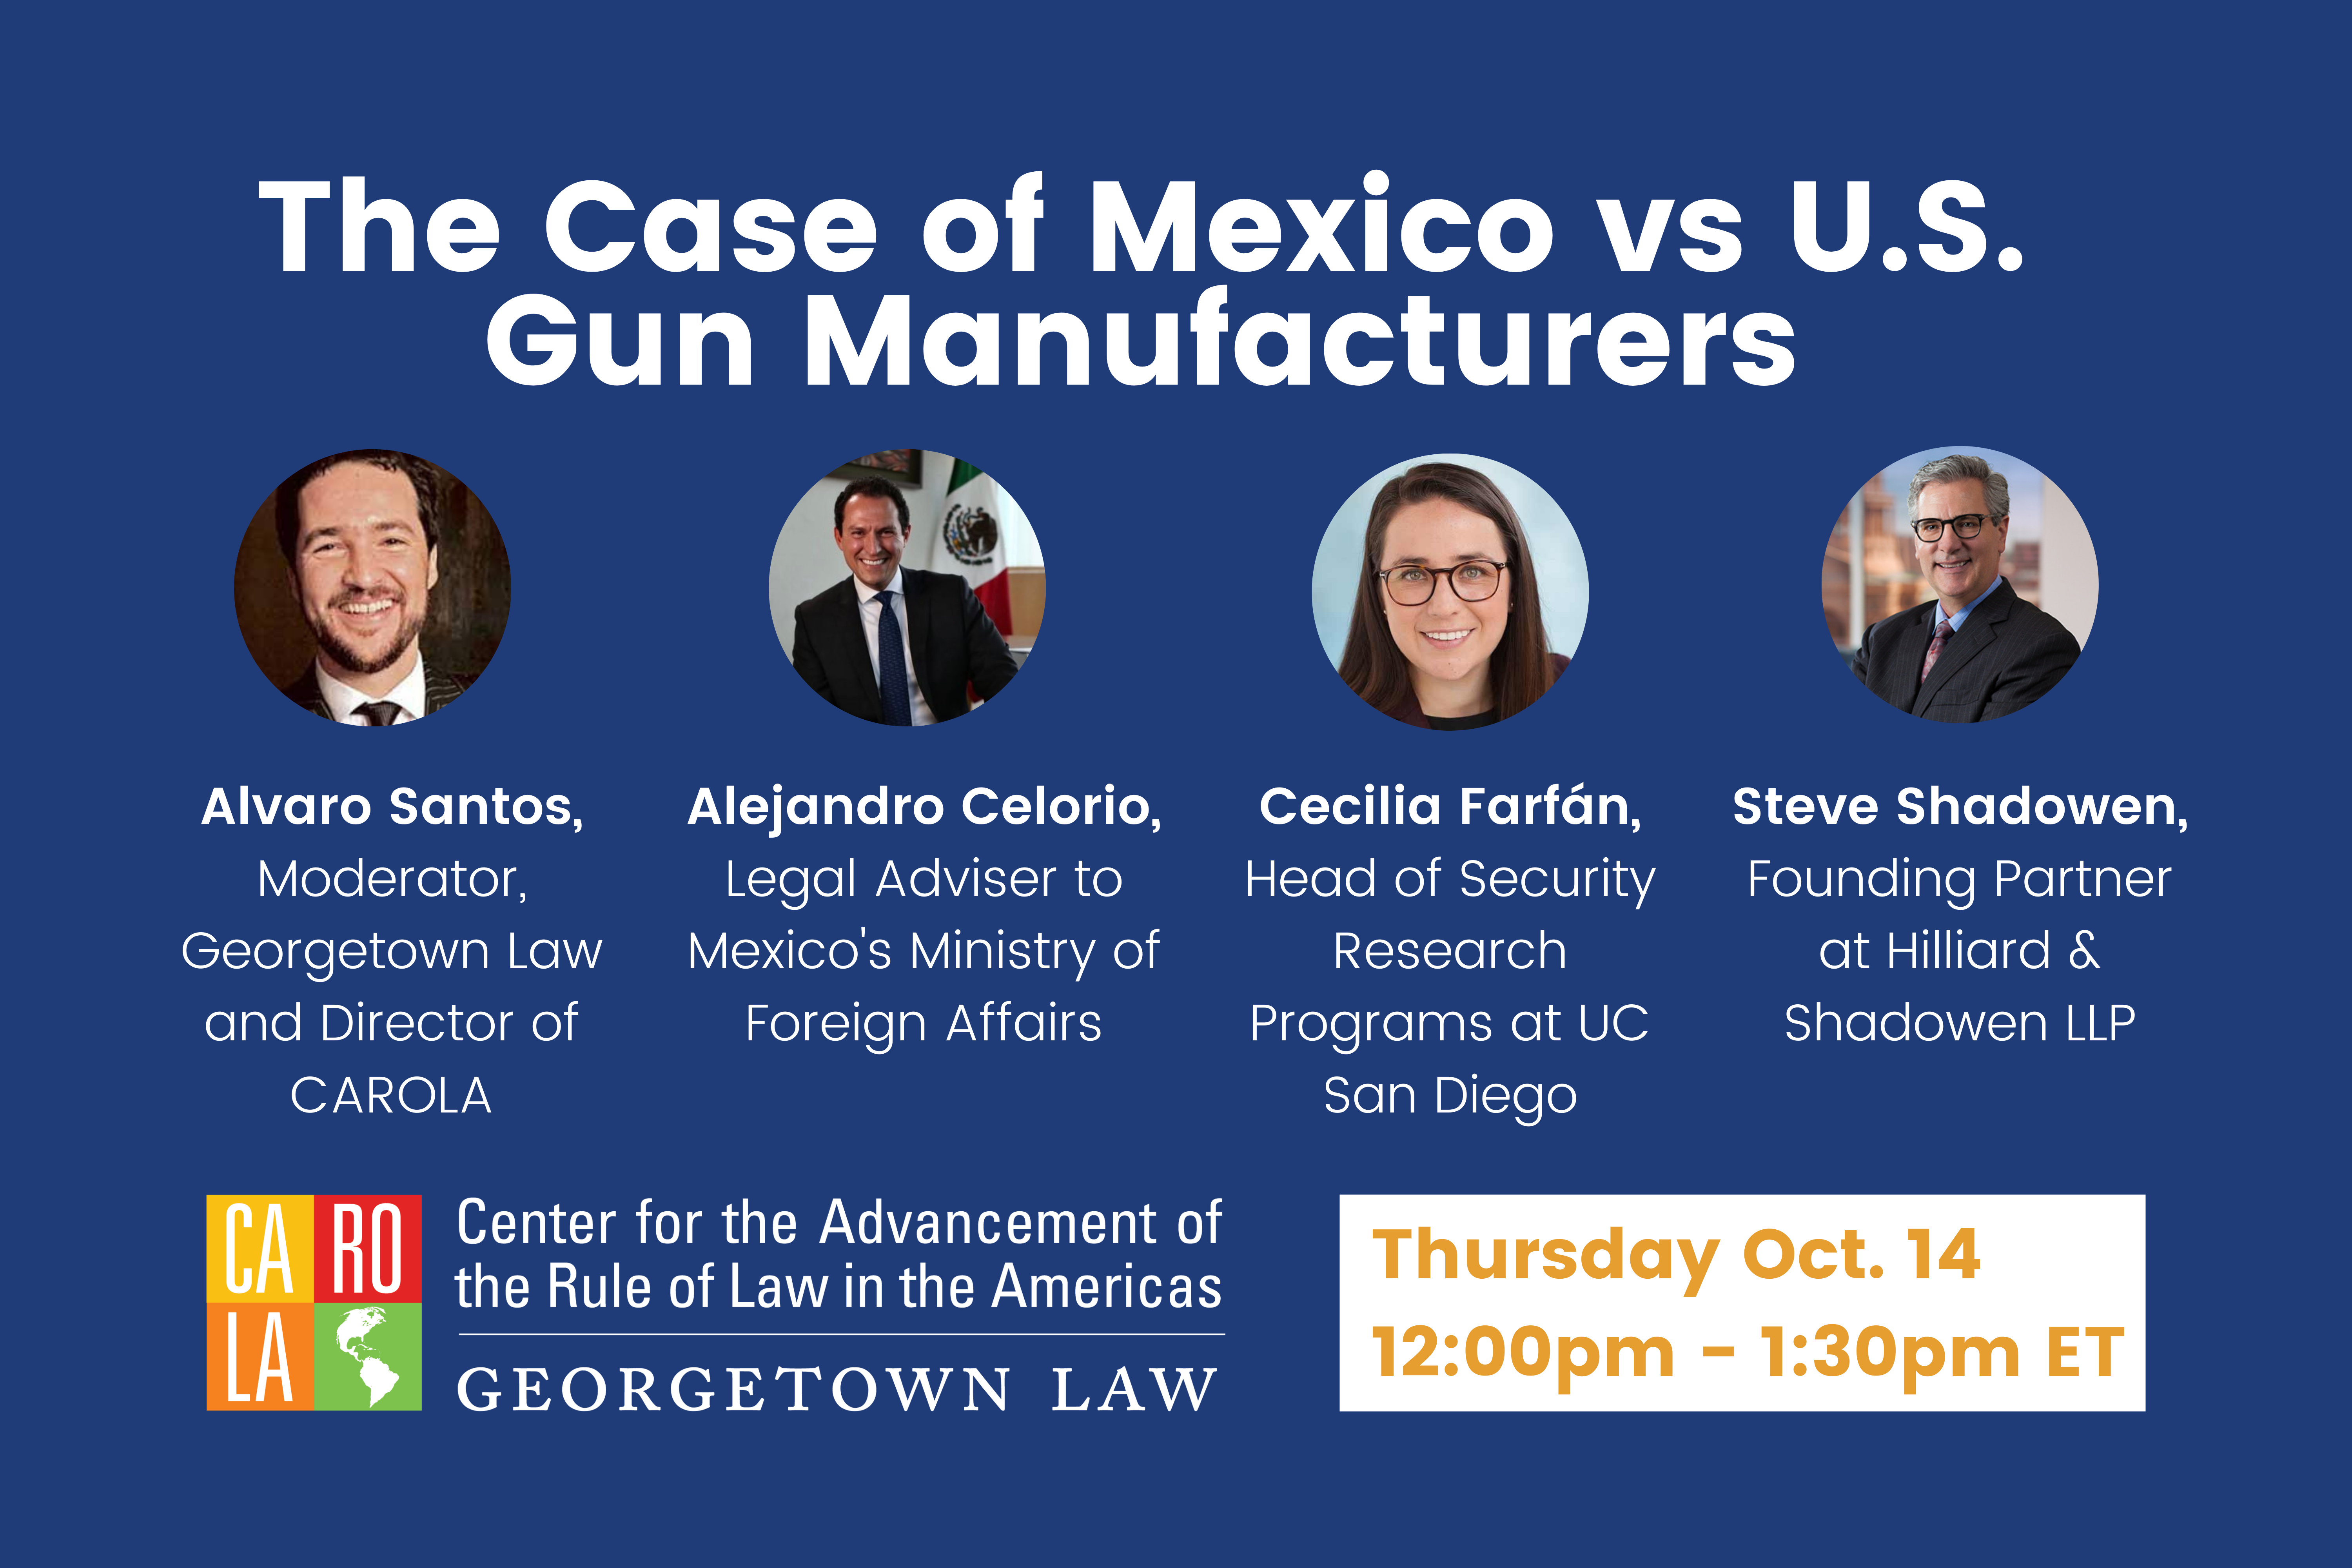 Flyer for the The Case of Mexico vs U.S. Gun Manufacturers event